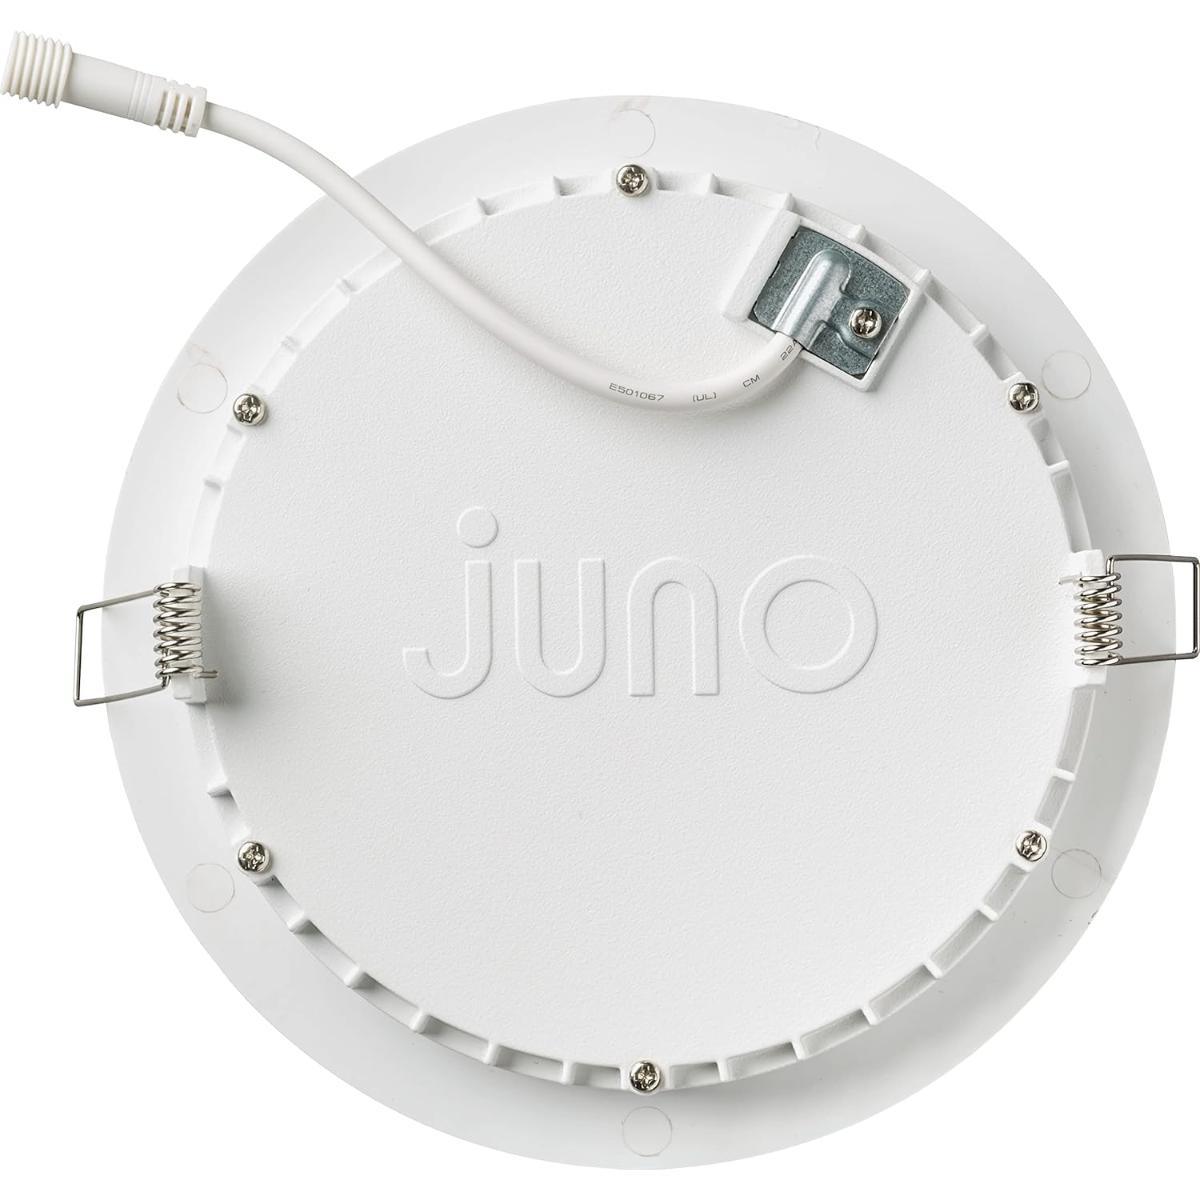 6 In. Wafer Regress LED Recessed Light, 1000 Lumens, Selectable CCT, 2700K to 5000K, White Finish